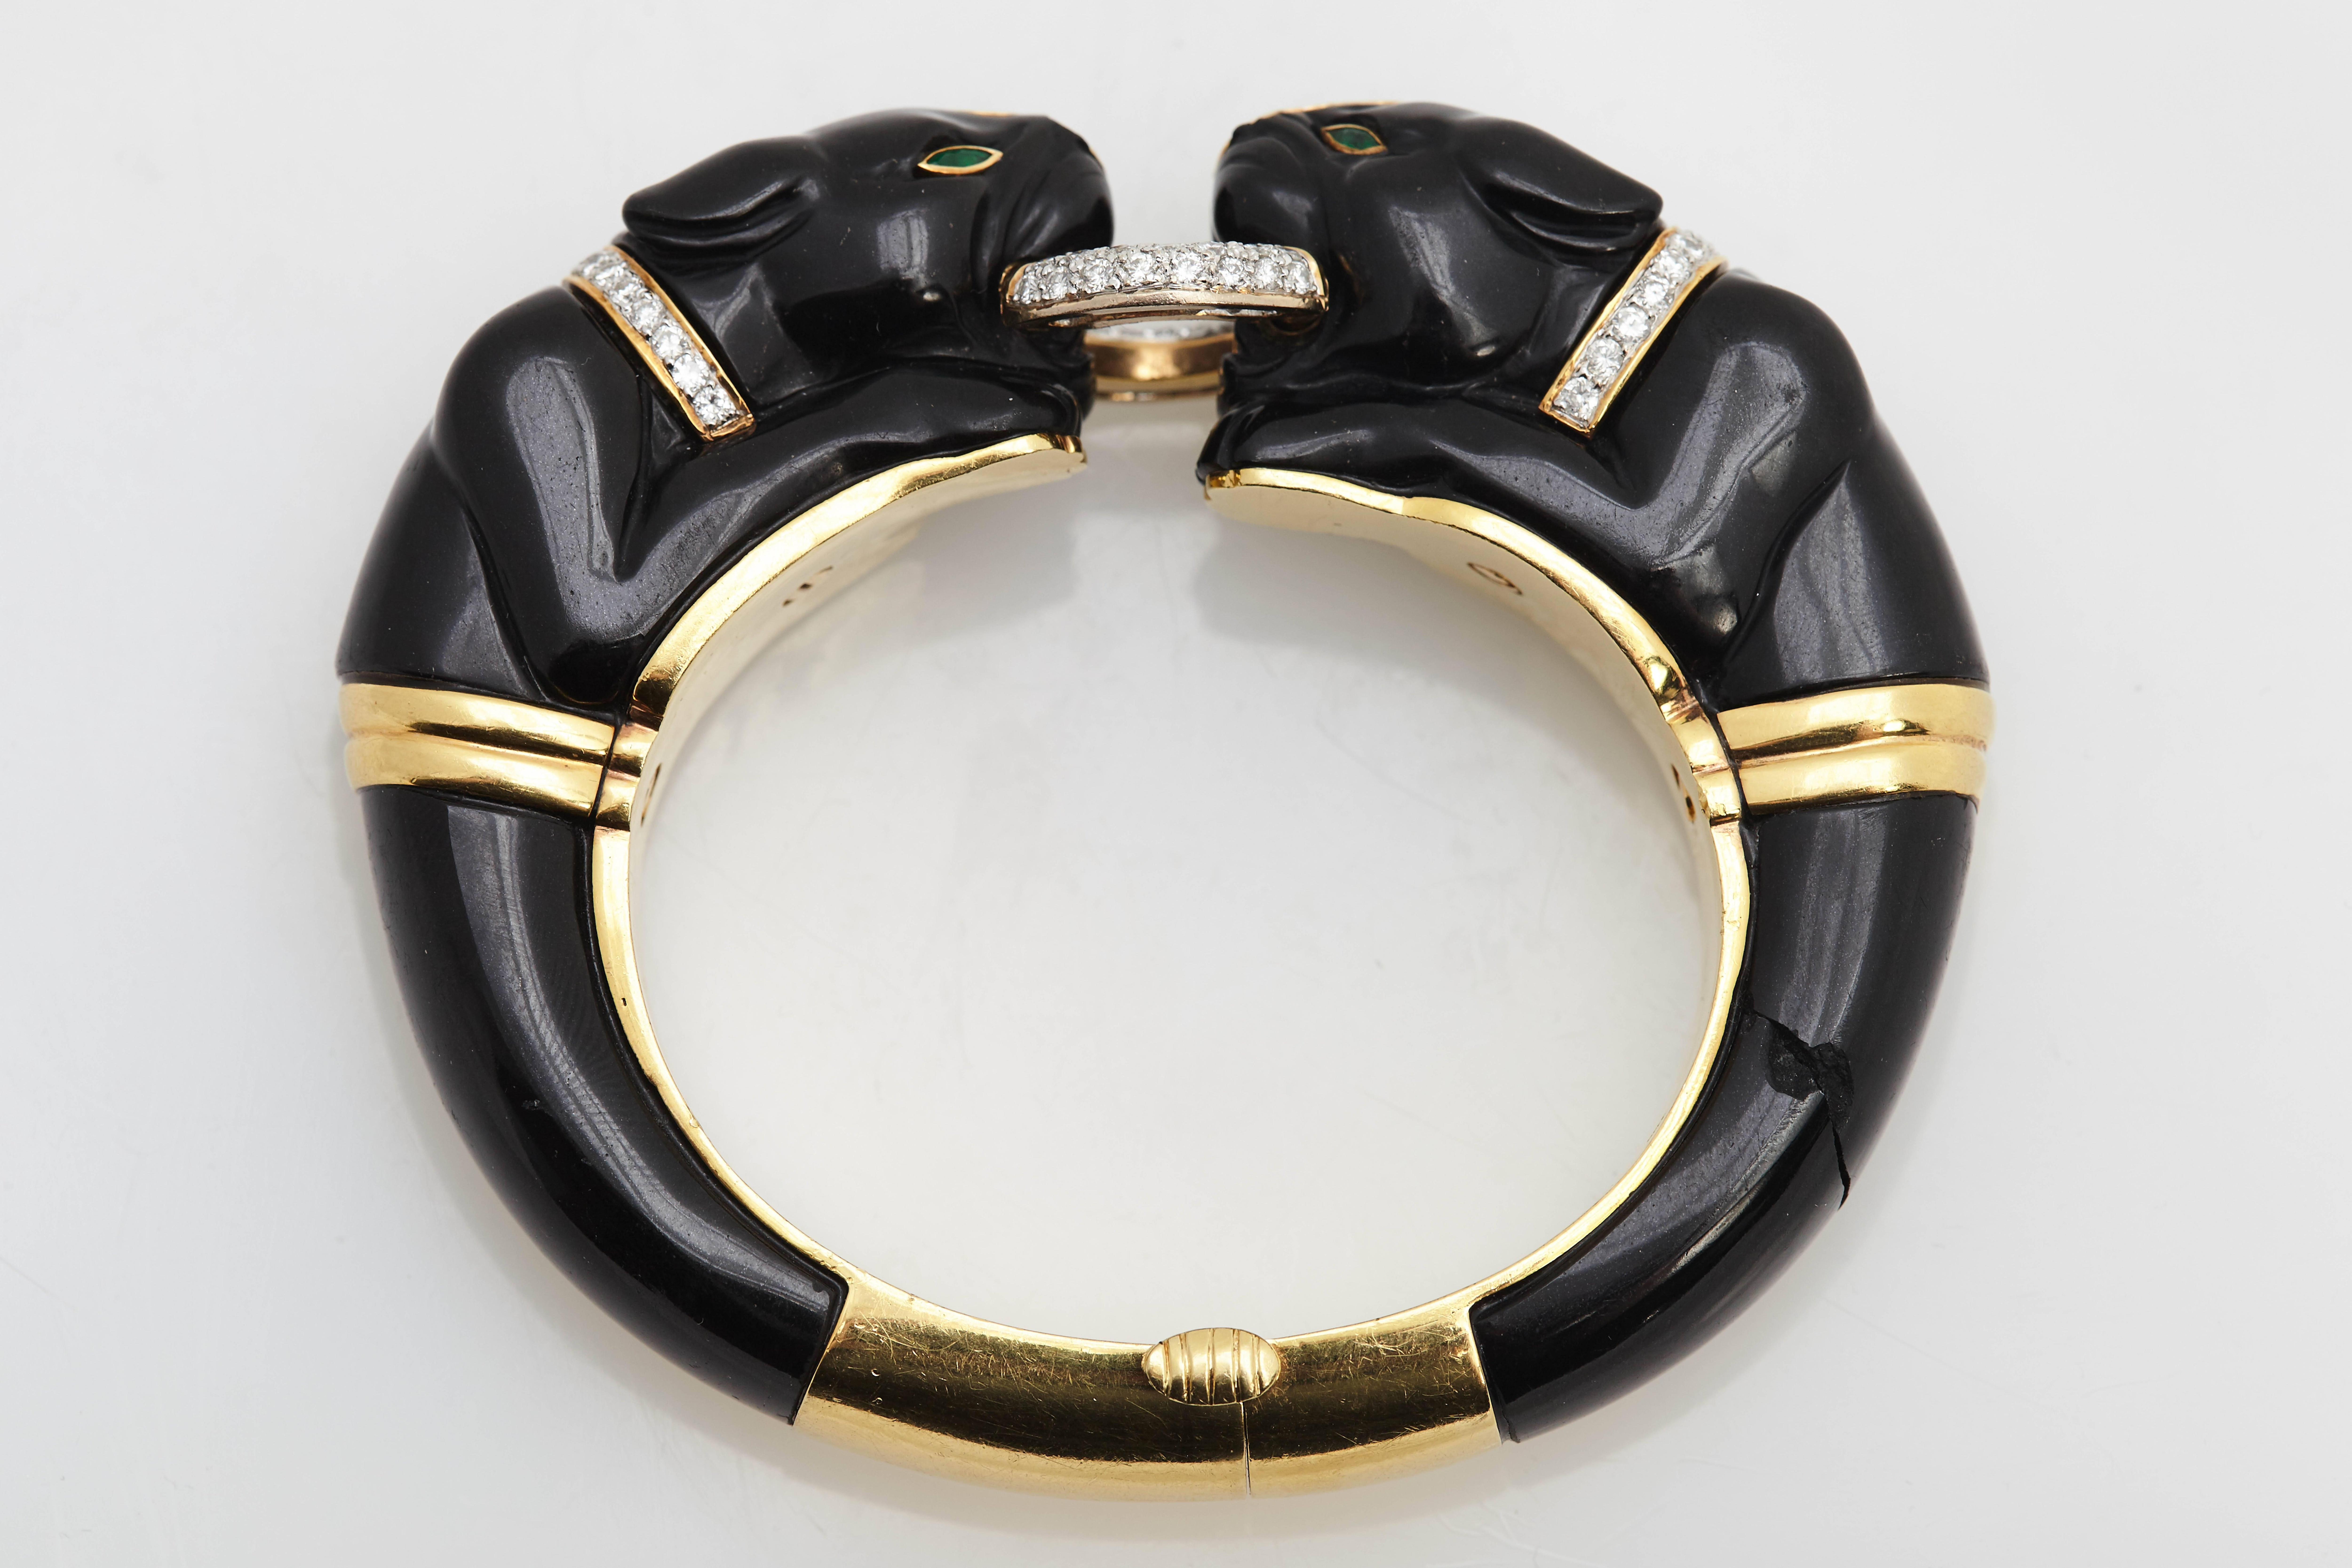 An 18K Yellow Gold, Carved Onyx and Diamond Double Panther Bangle, with Emerald Eyes. Made in Italy, circa 1970. 